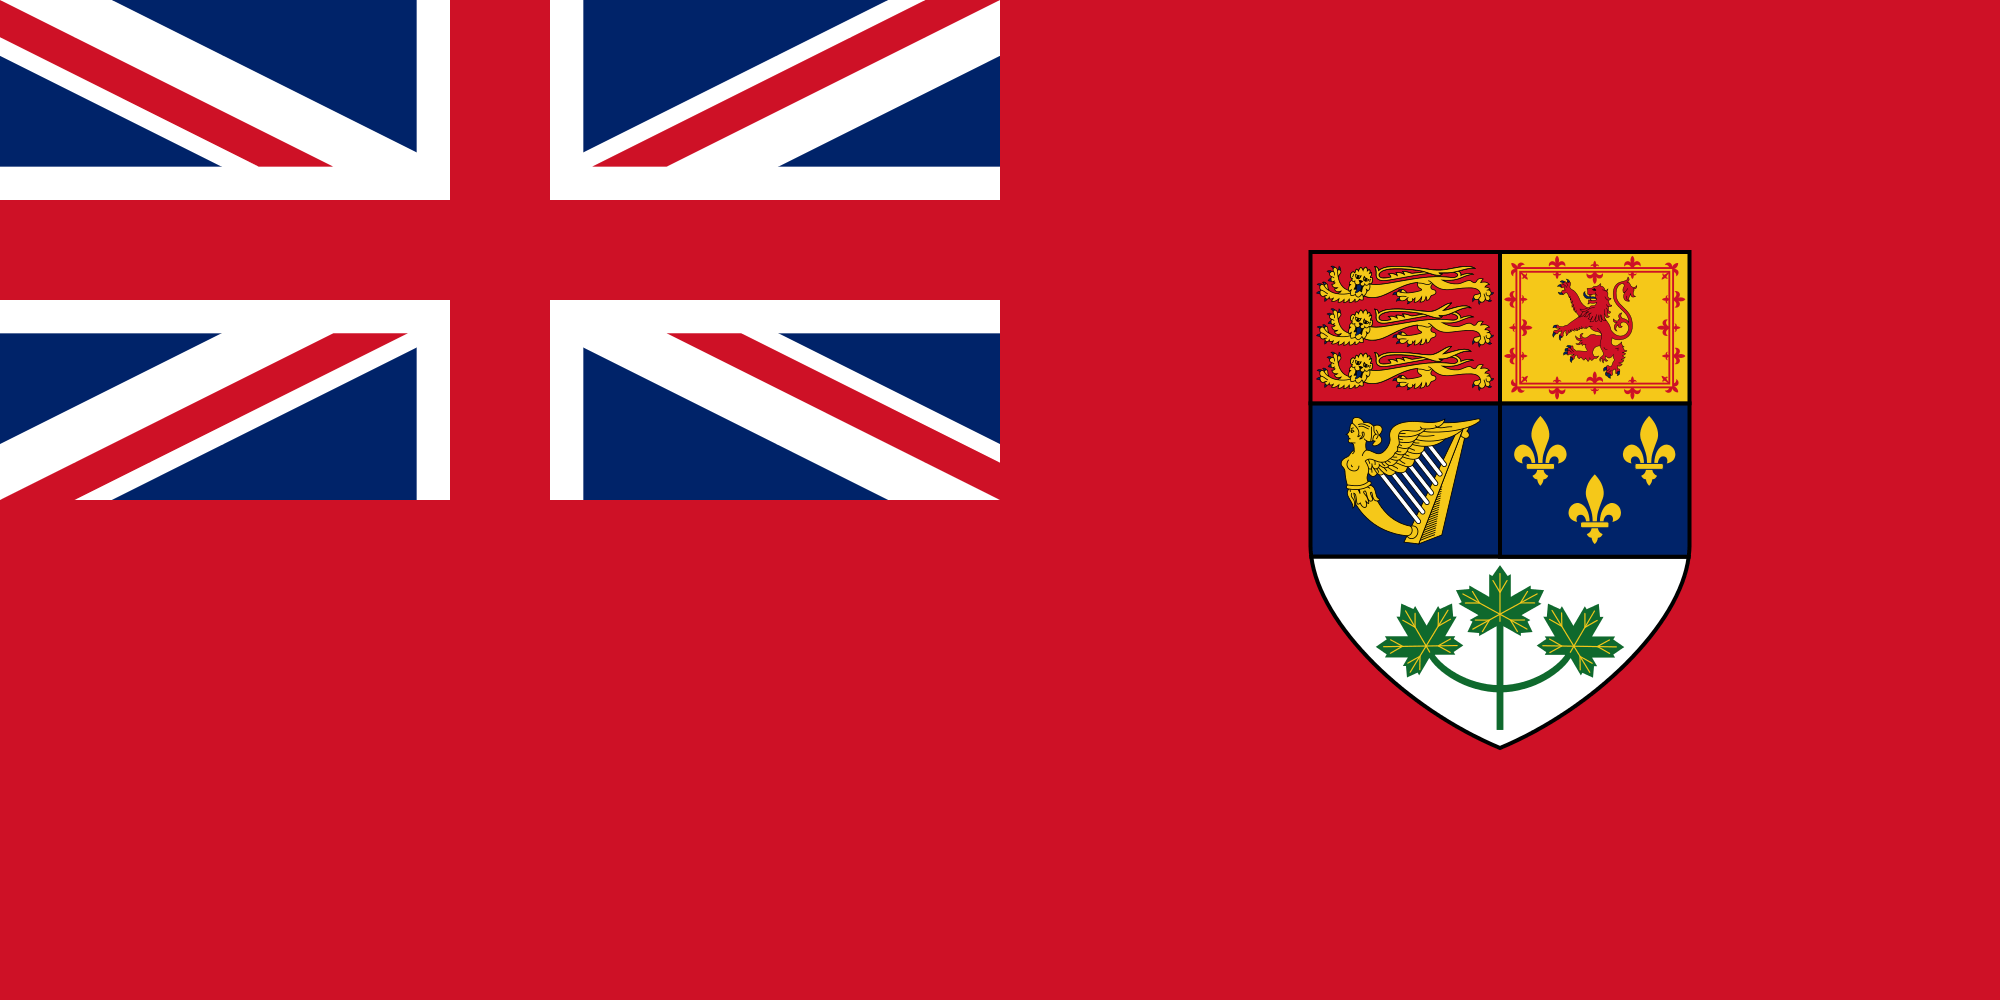 Canada, Red Ensign flag from 1921-1957